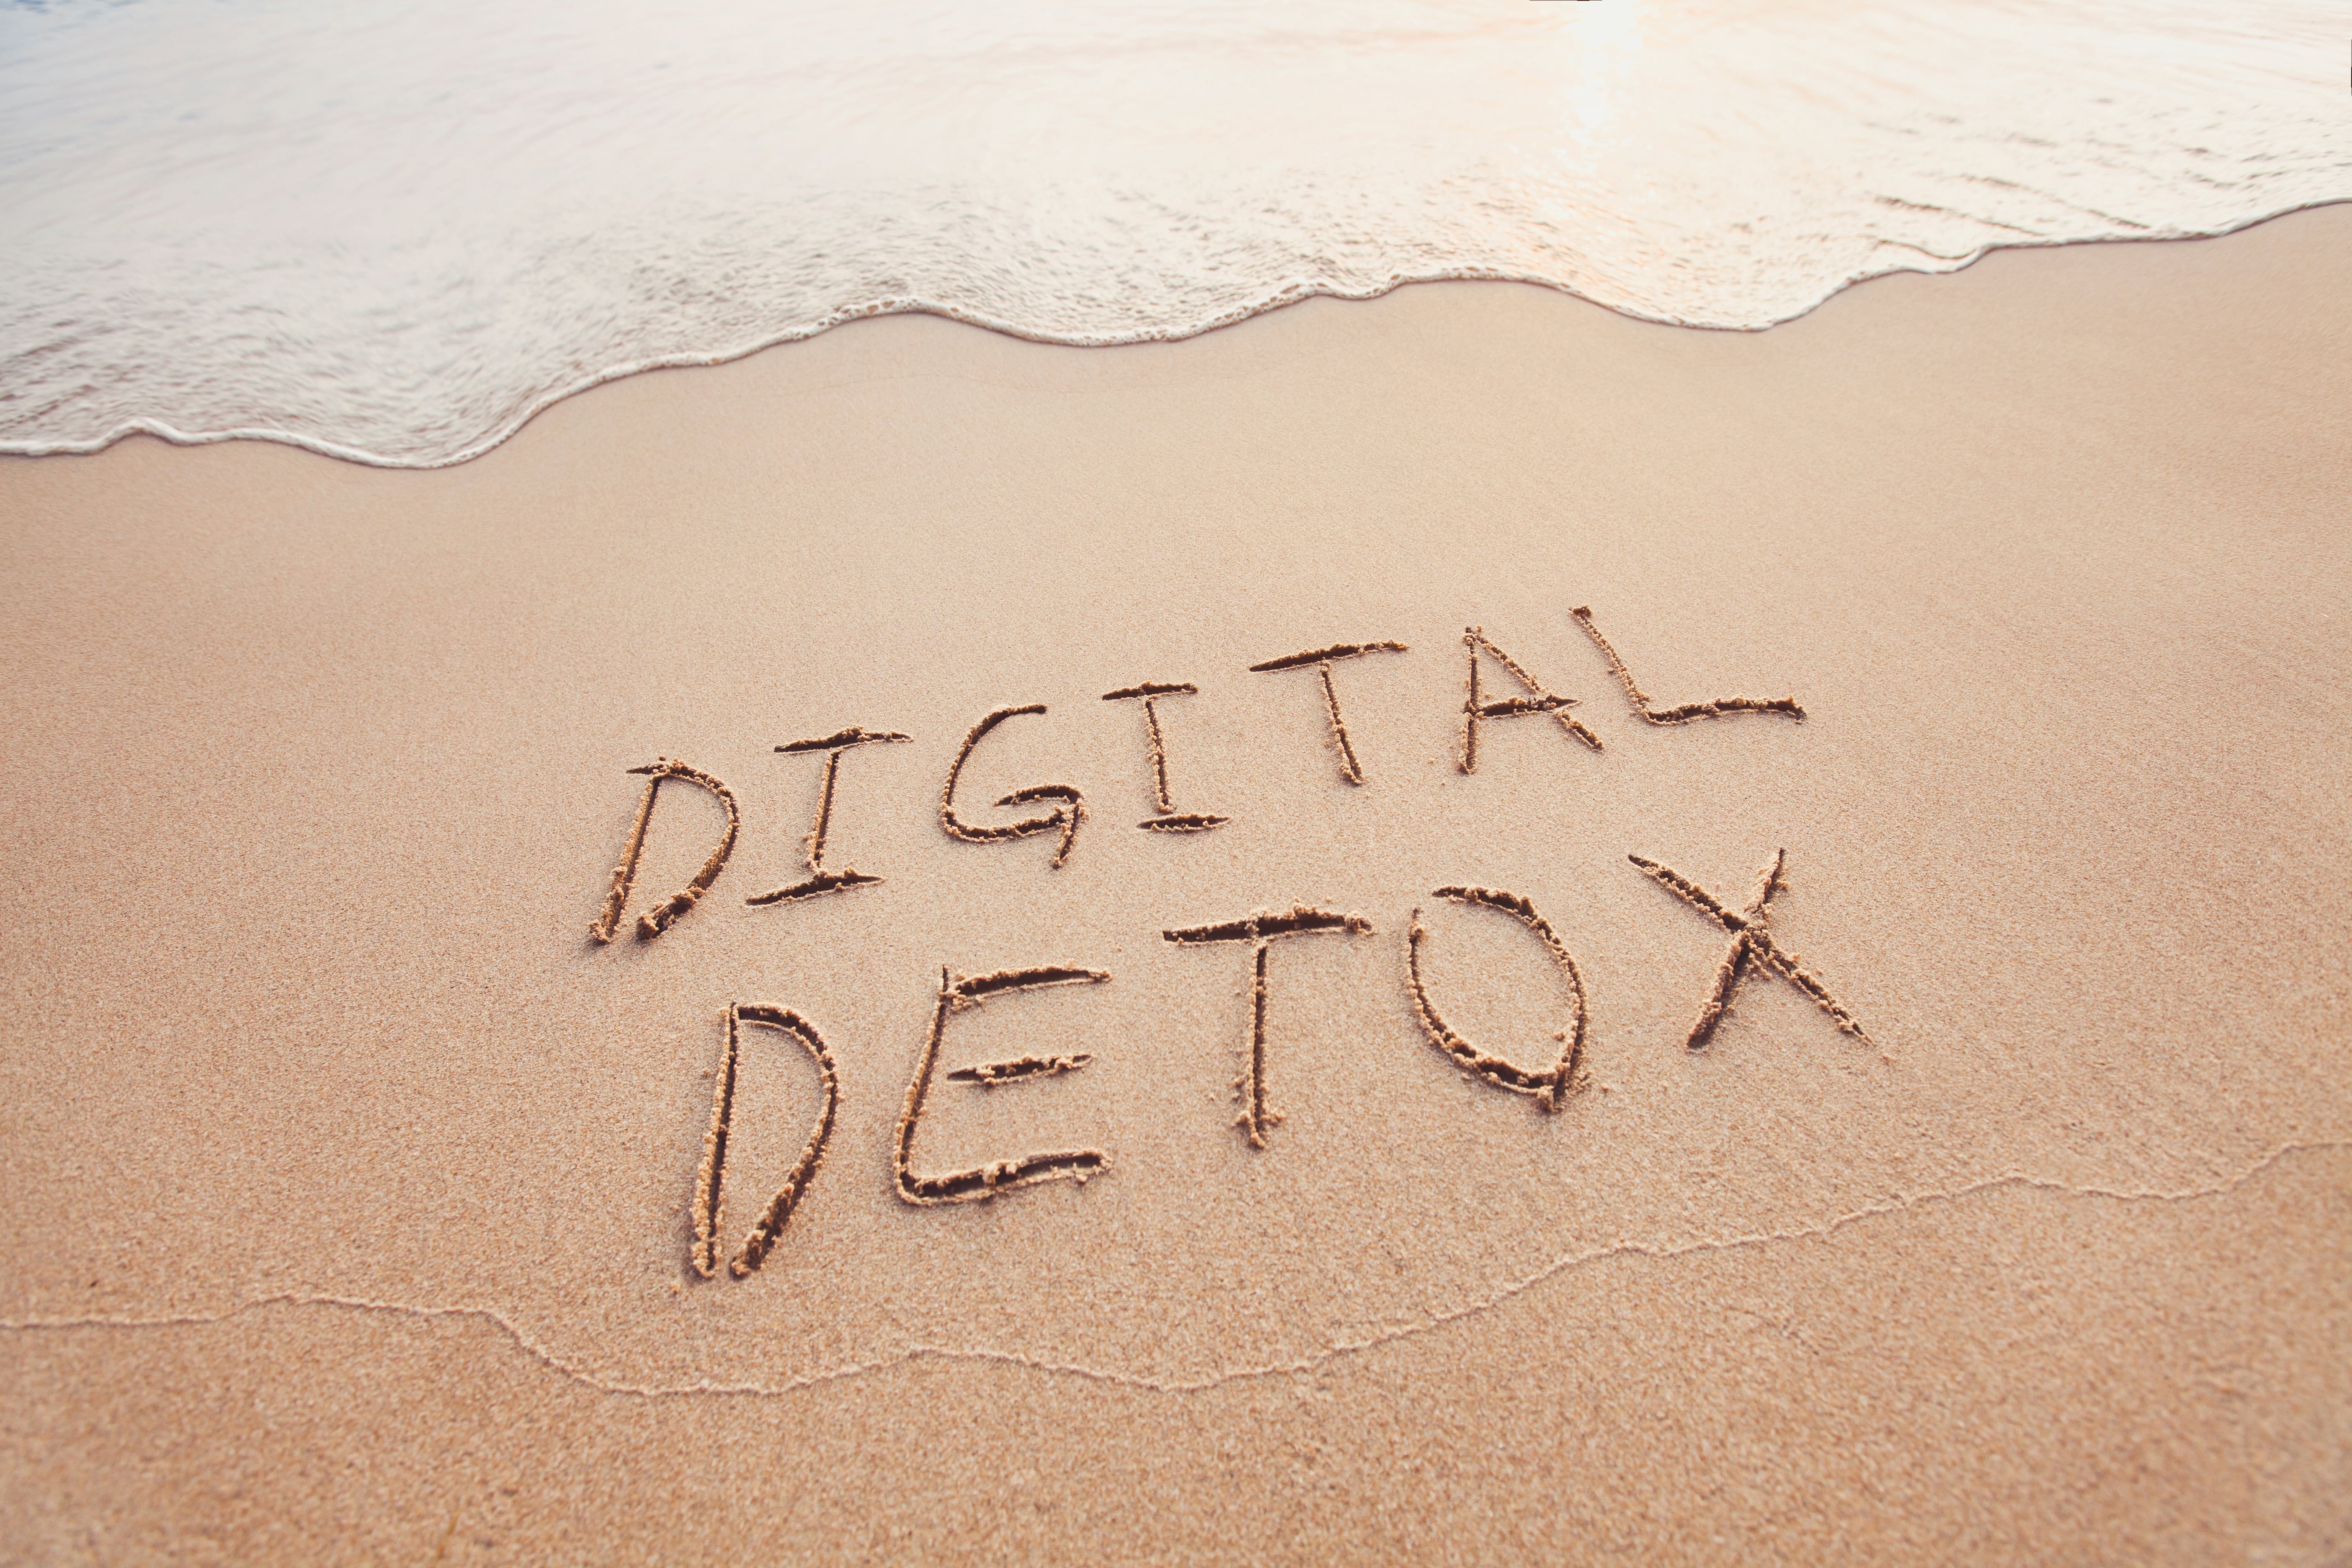 Digital detox written in the sand as the tide goes out.